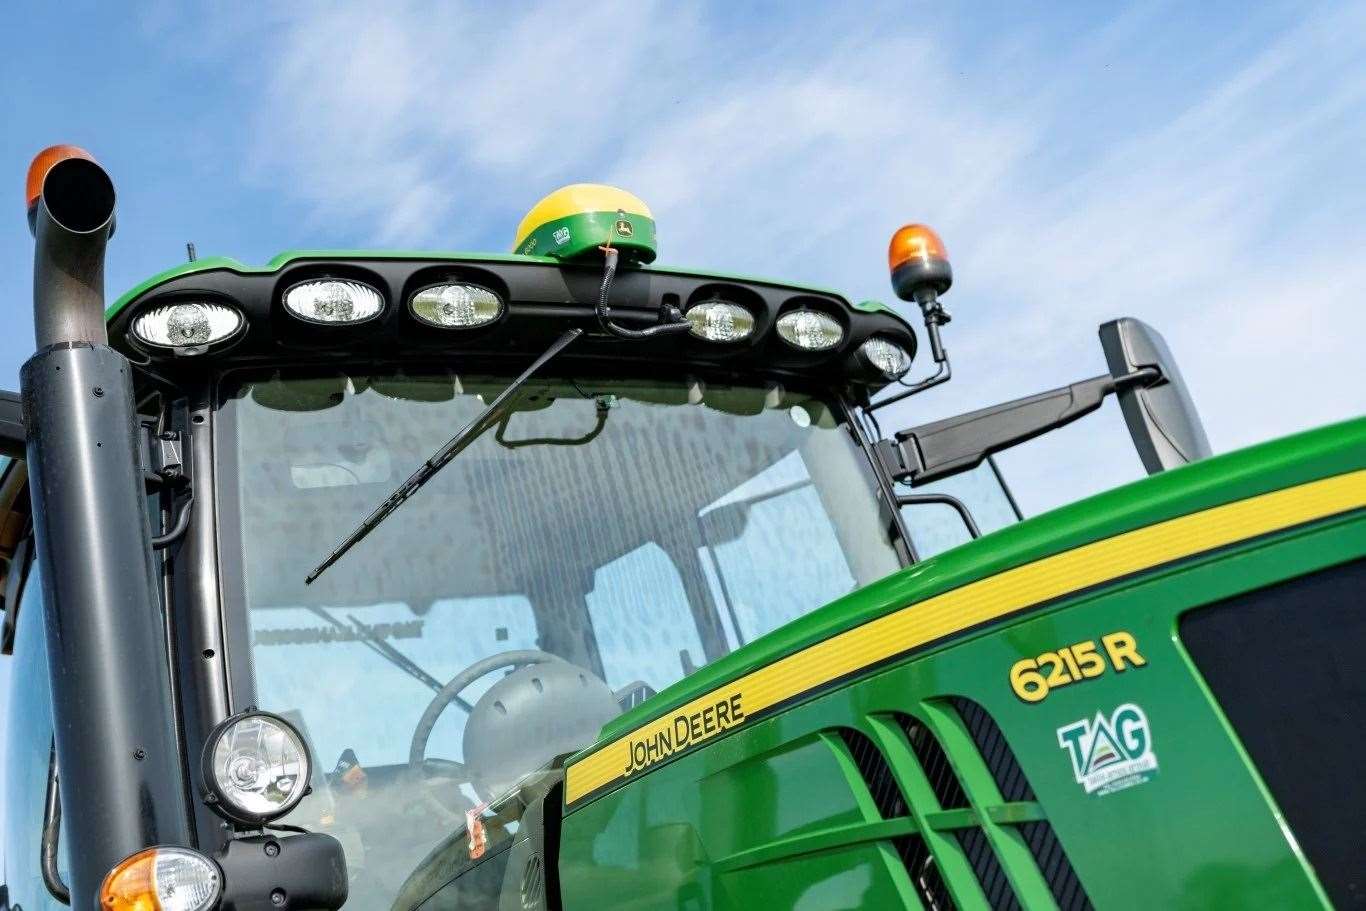 Accidents involving agricultural vehicles are over 50 per cent more likely in the summer